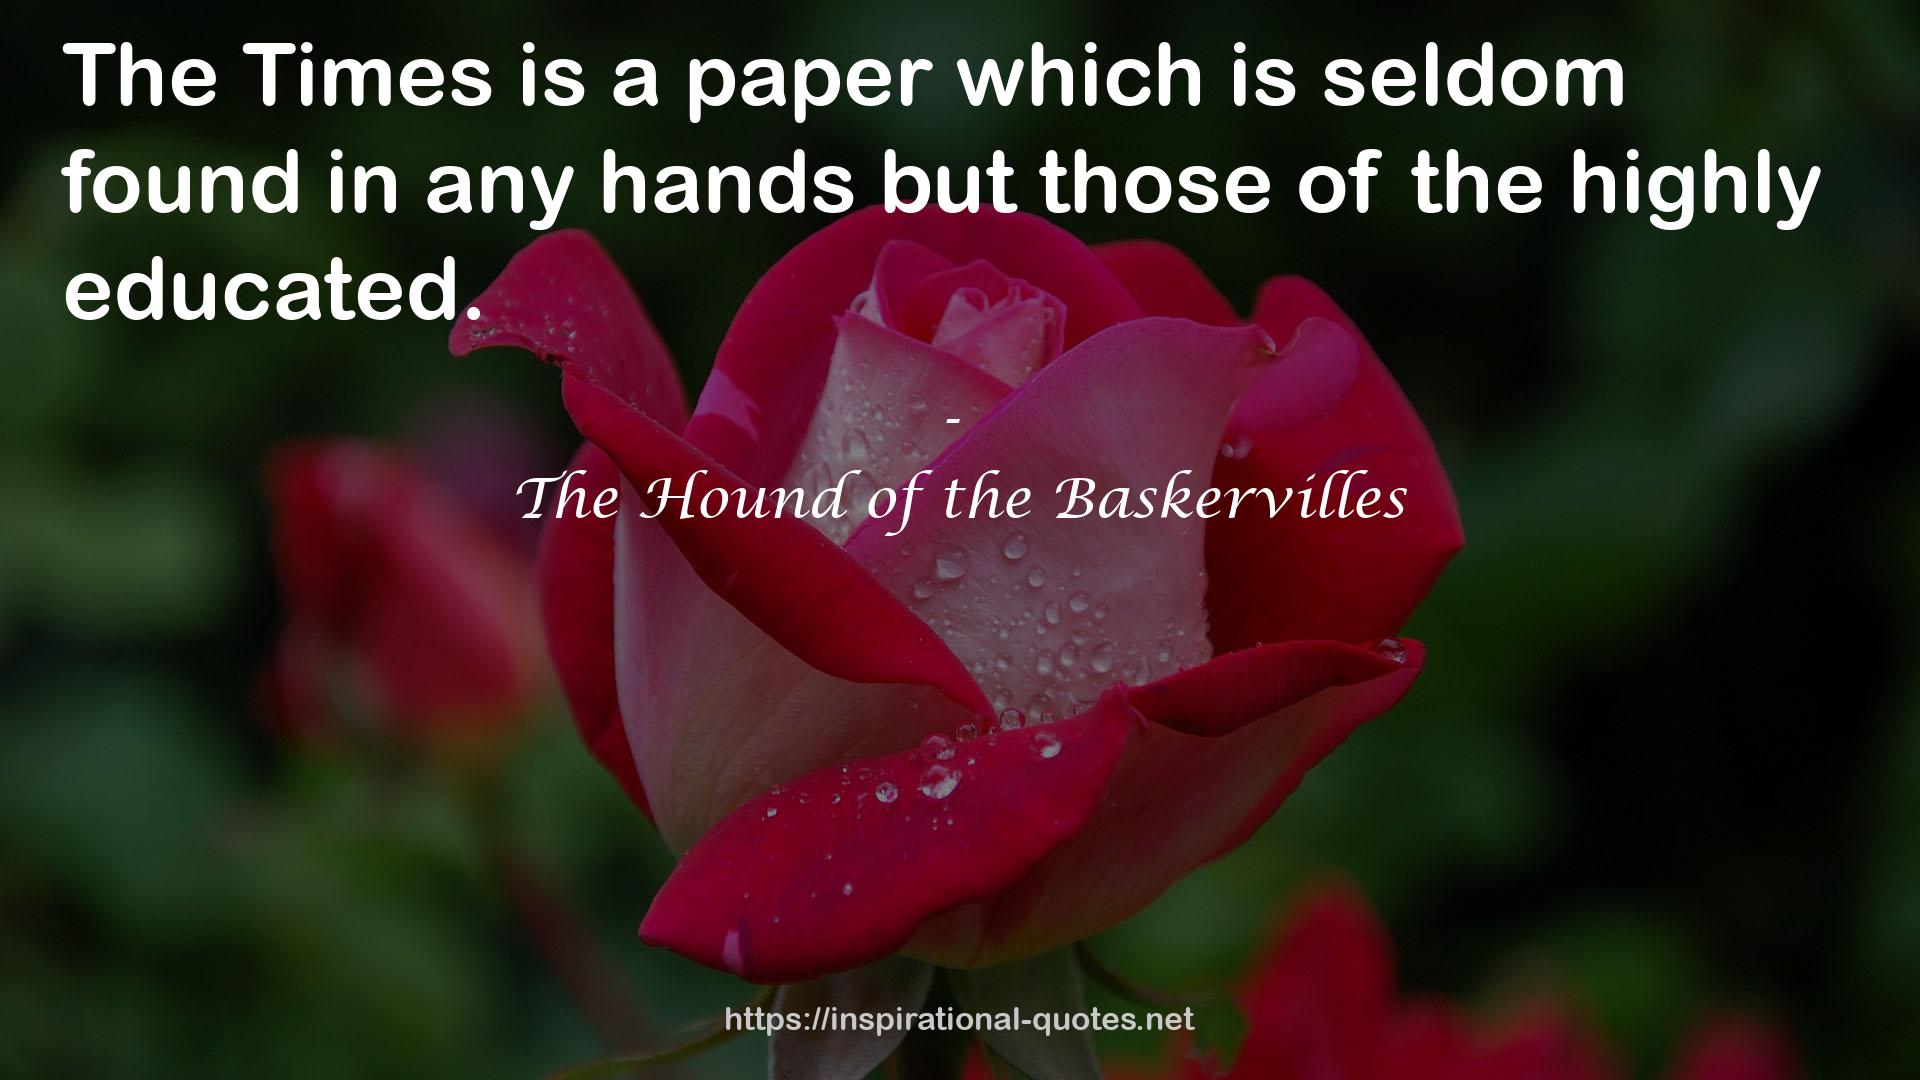 The Hound of the Baskervilles QUOTES